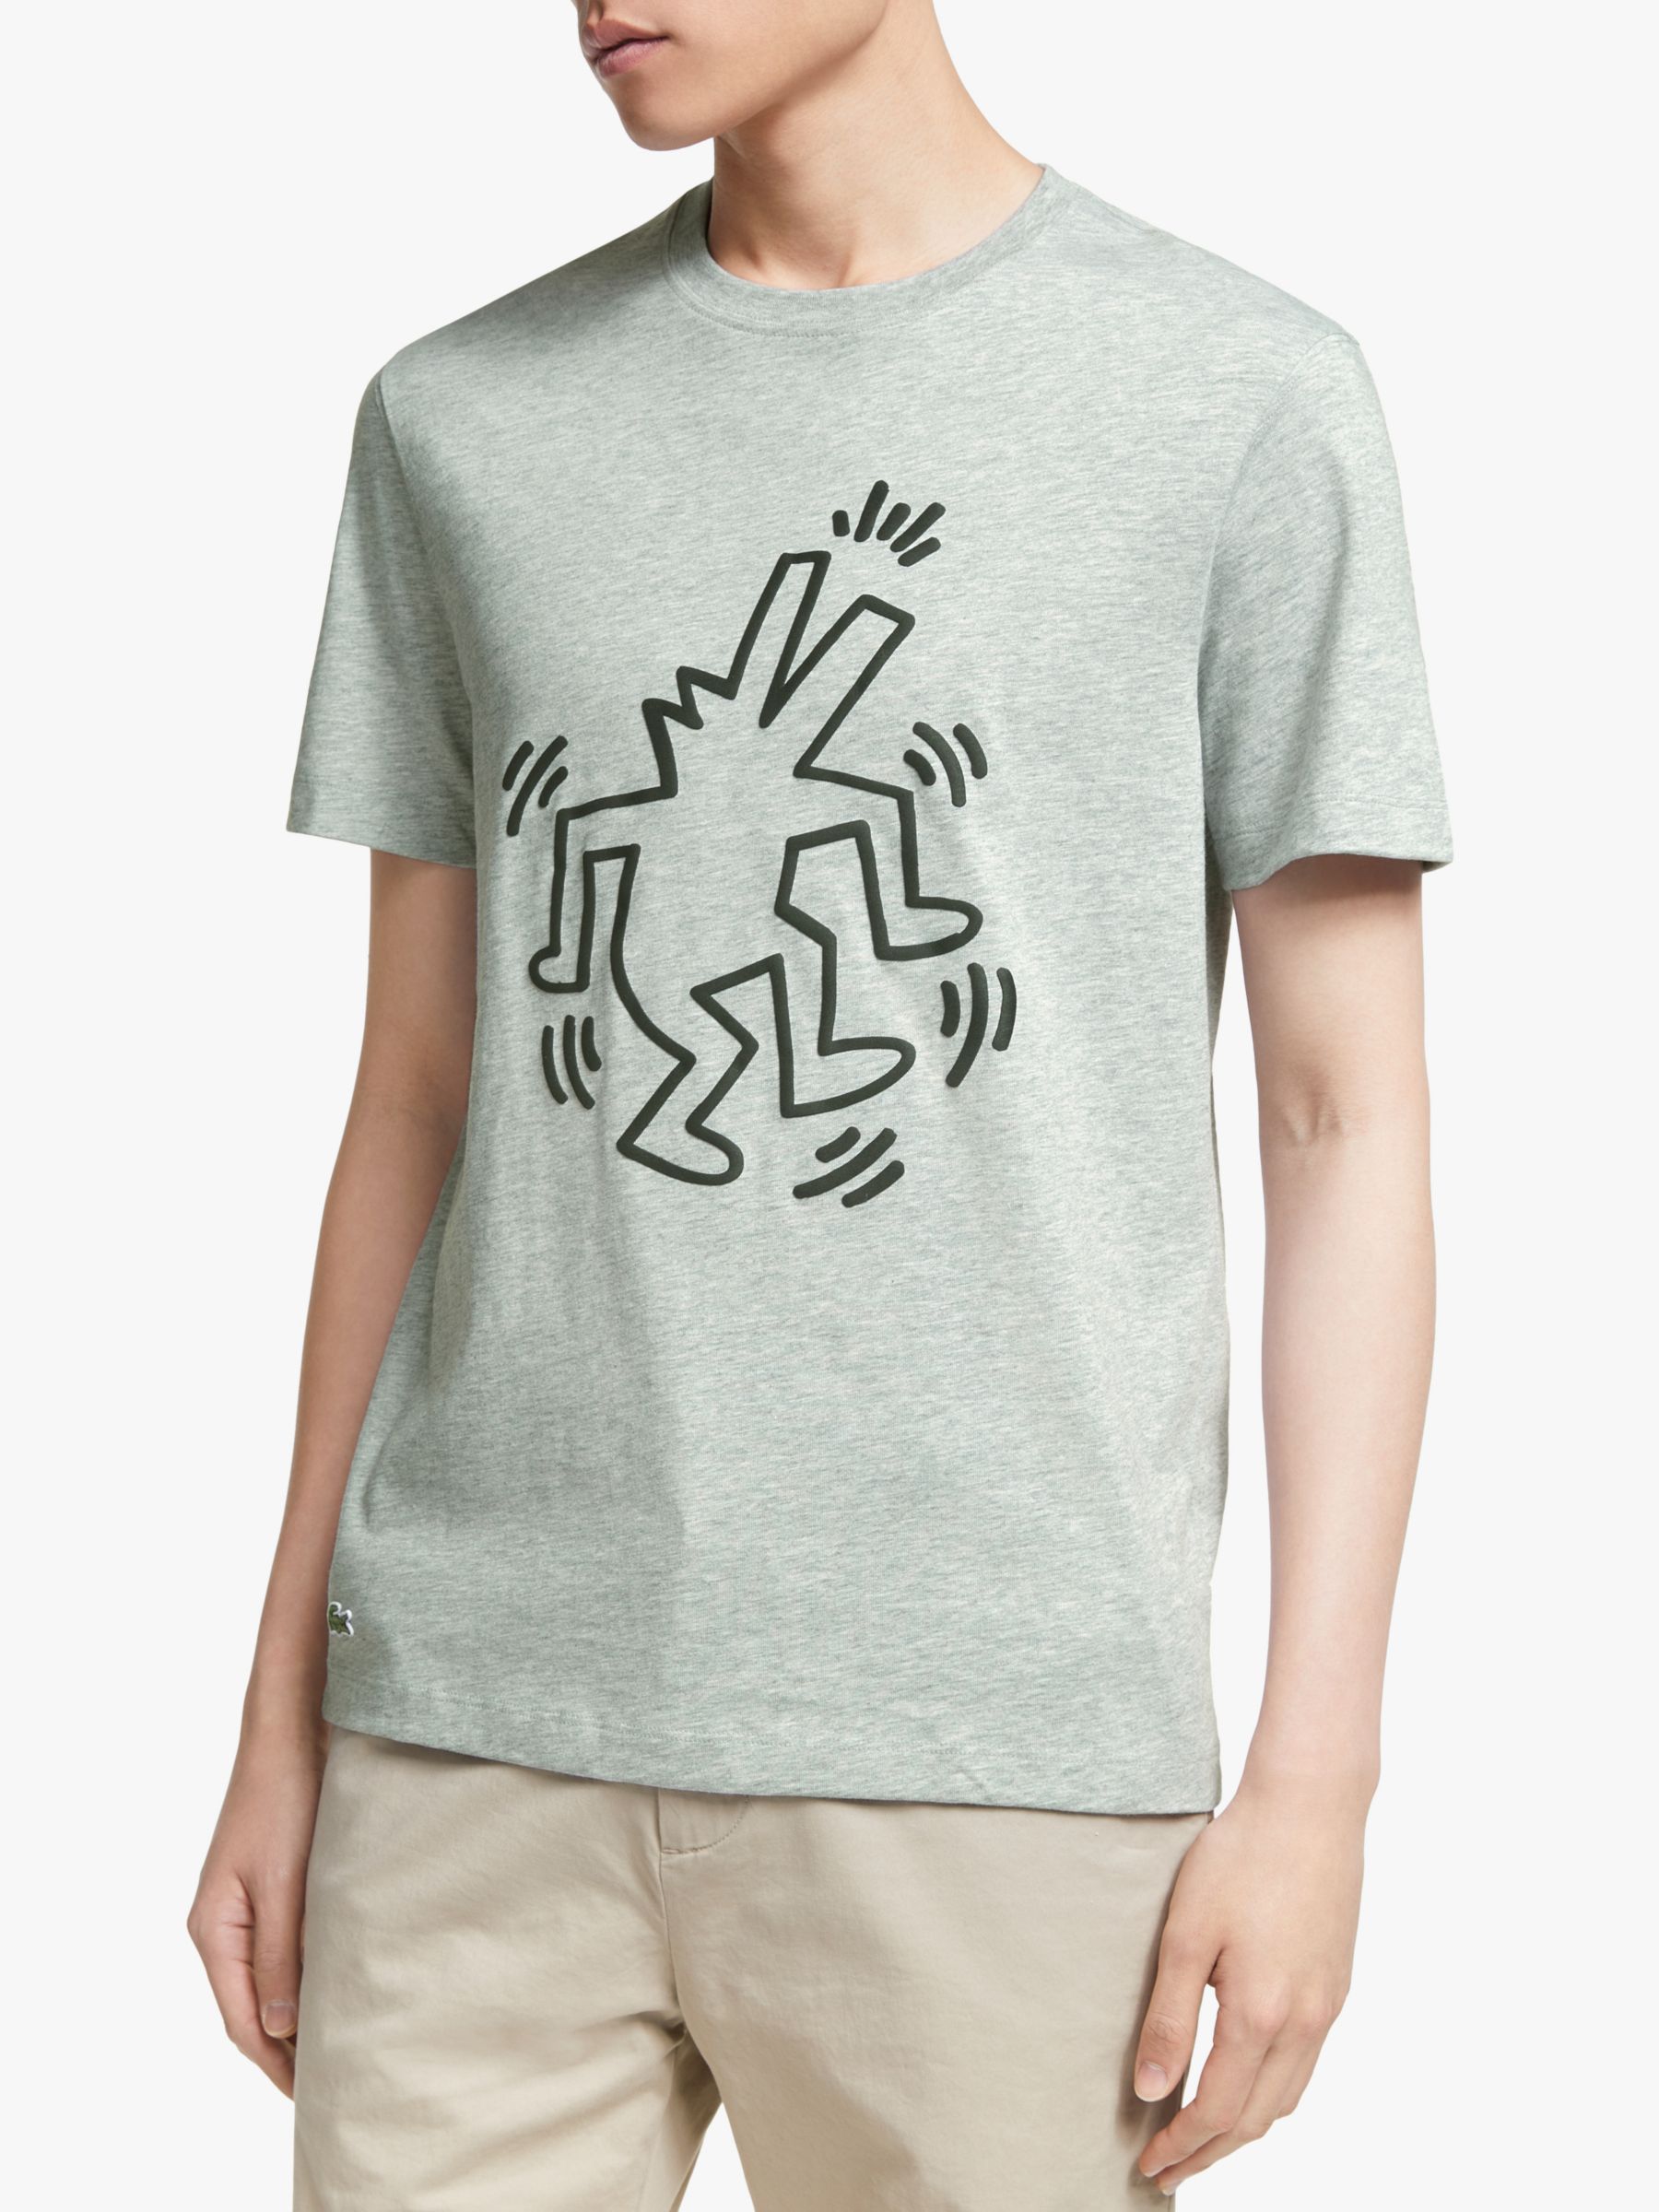 lacoste keith haring